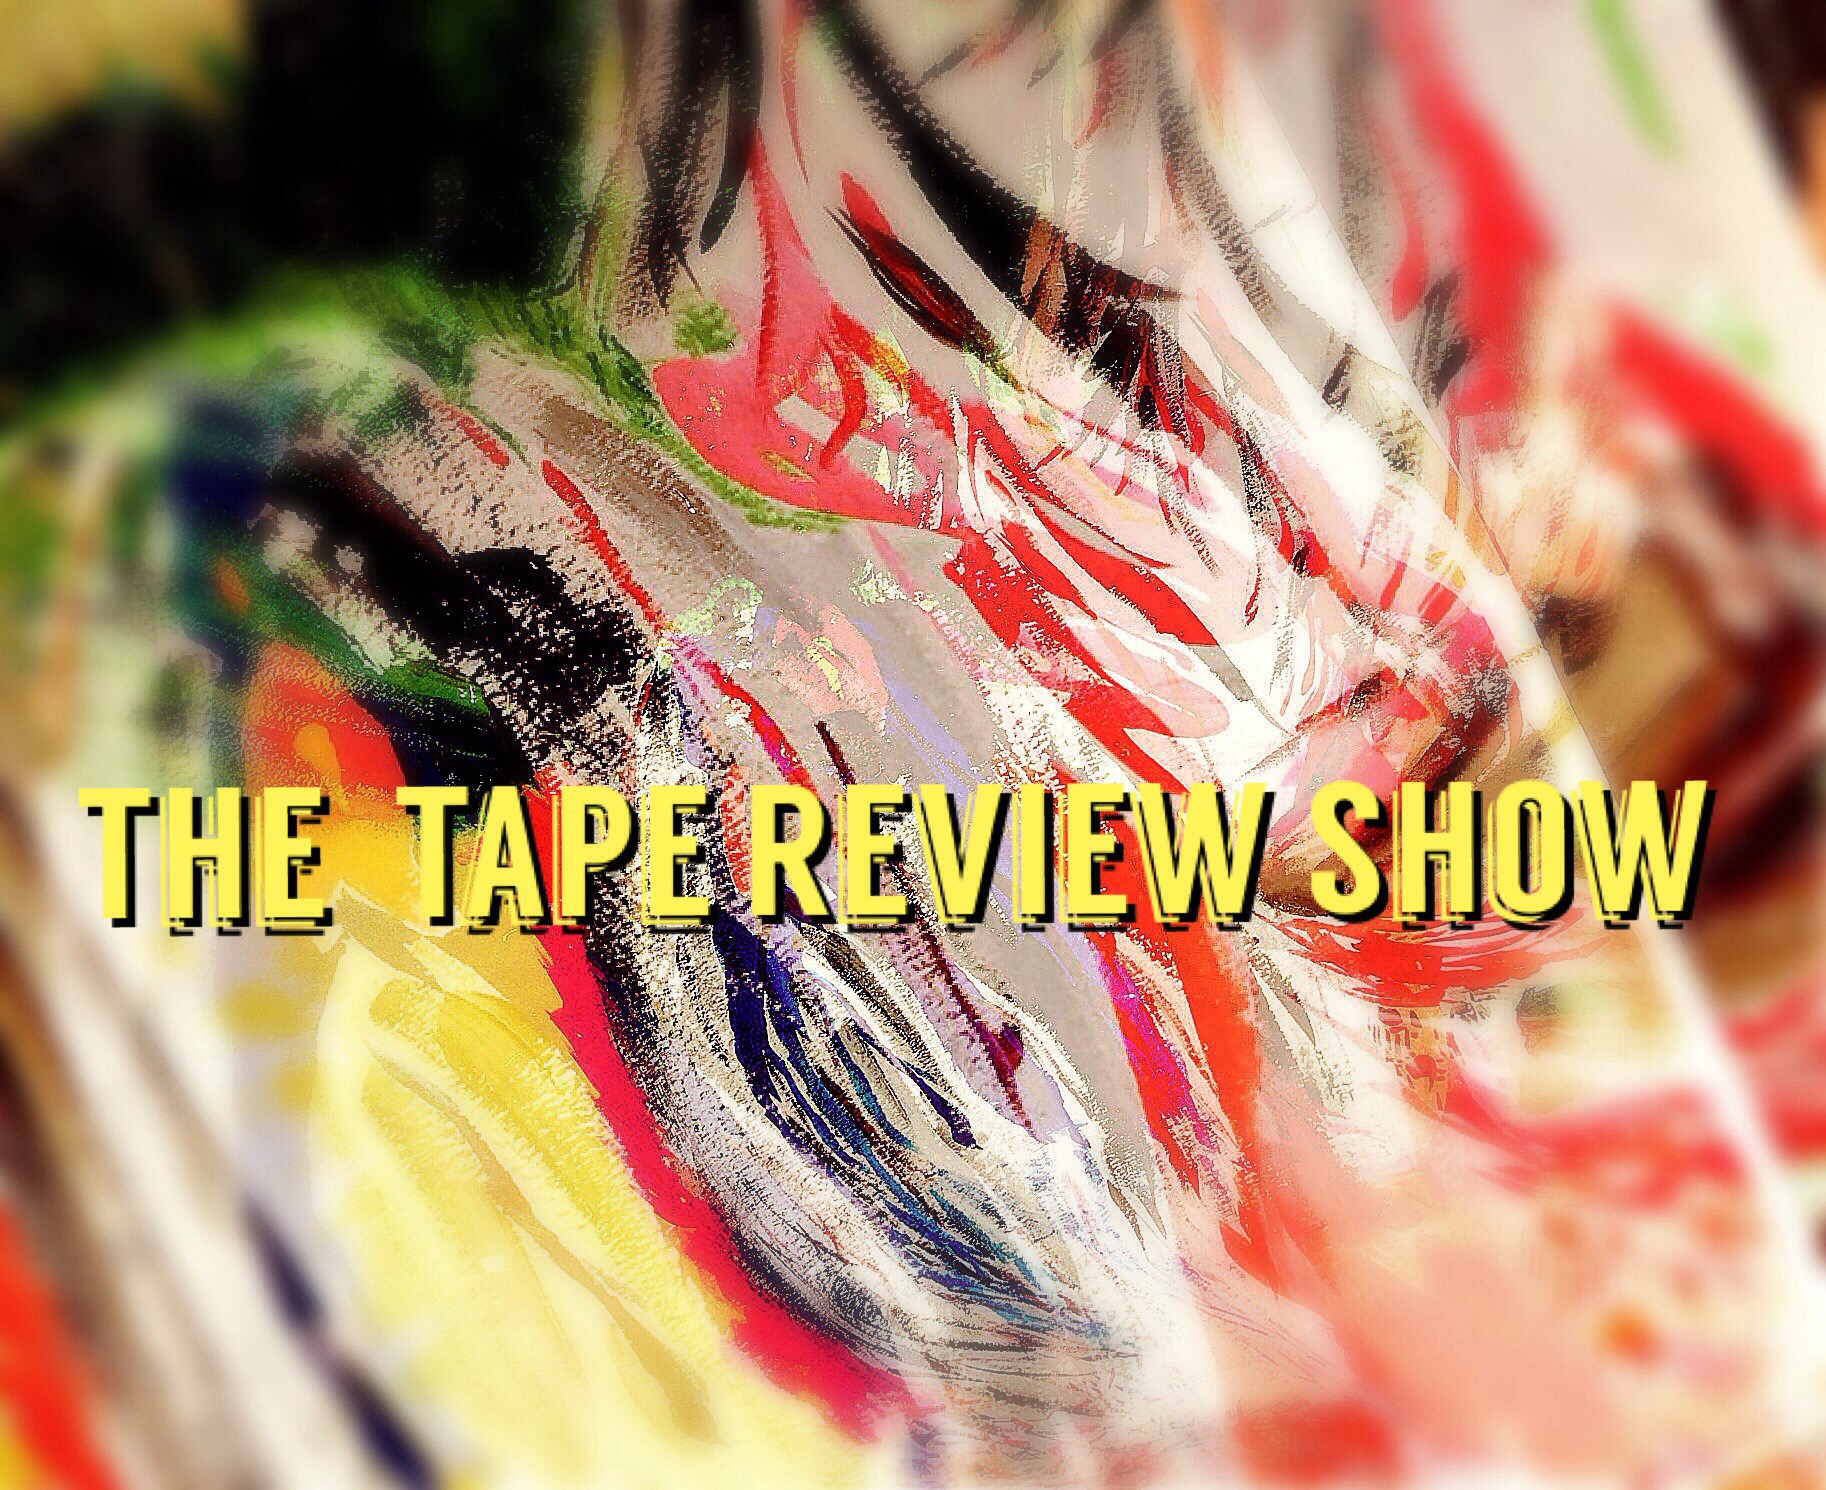 The Tape Review Show – Blair Petrie